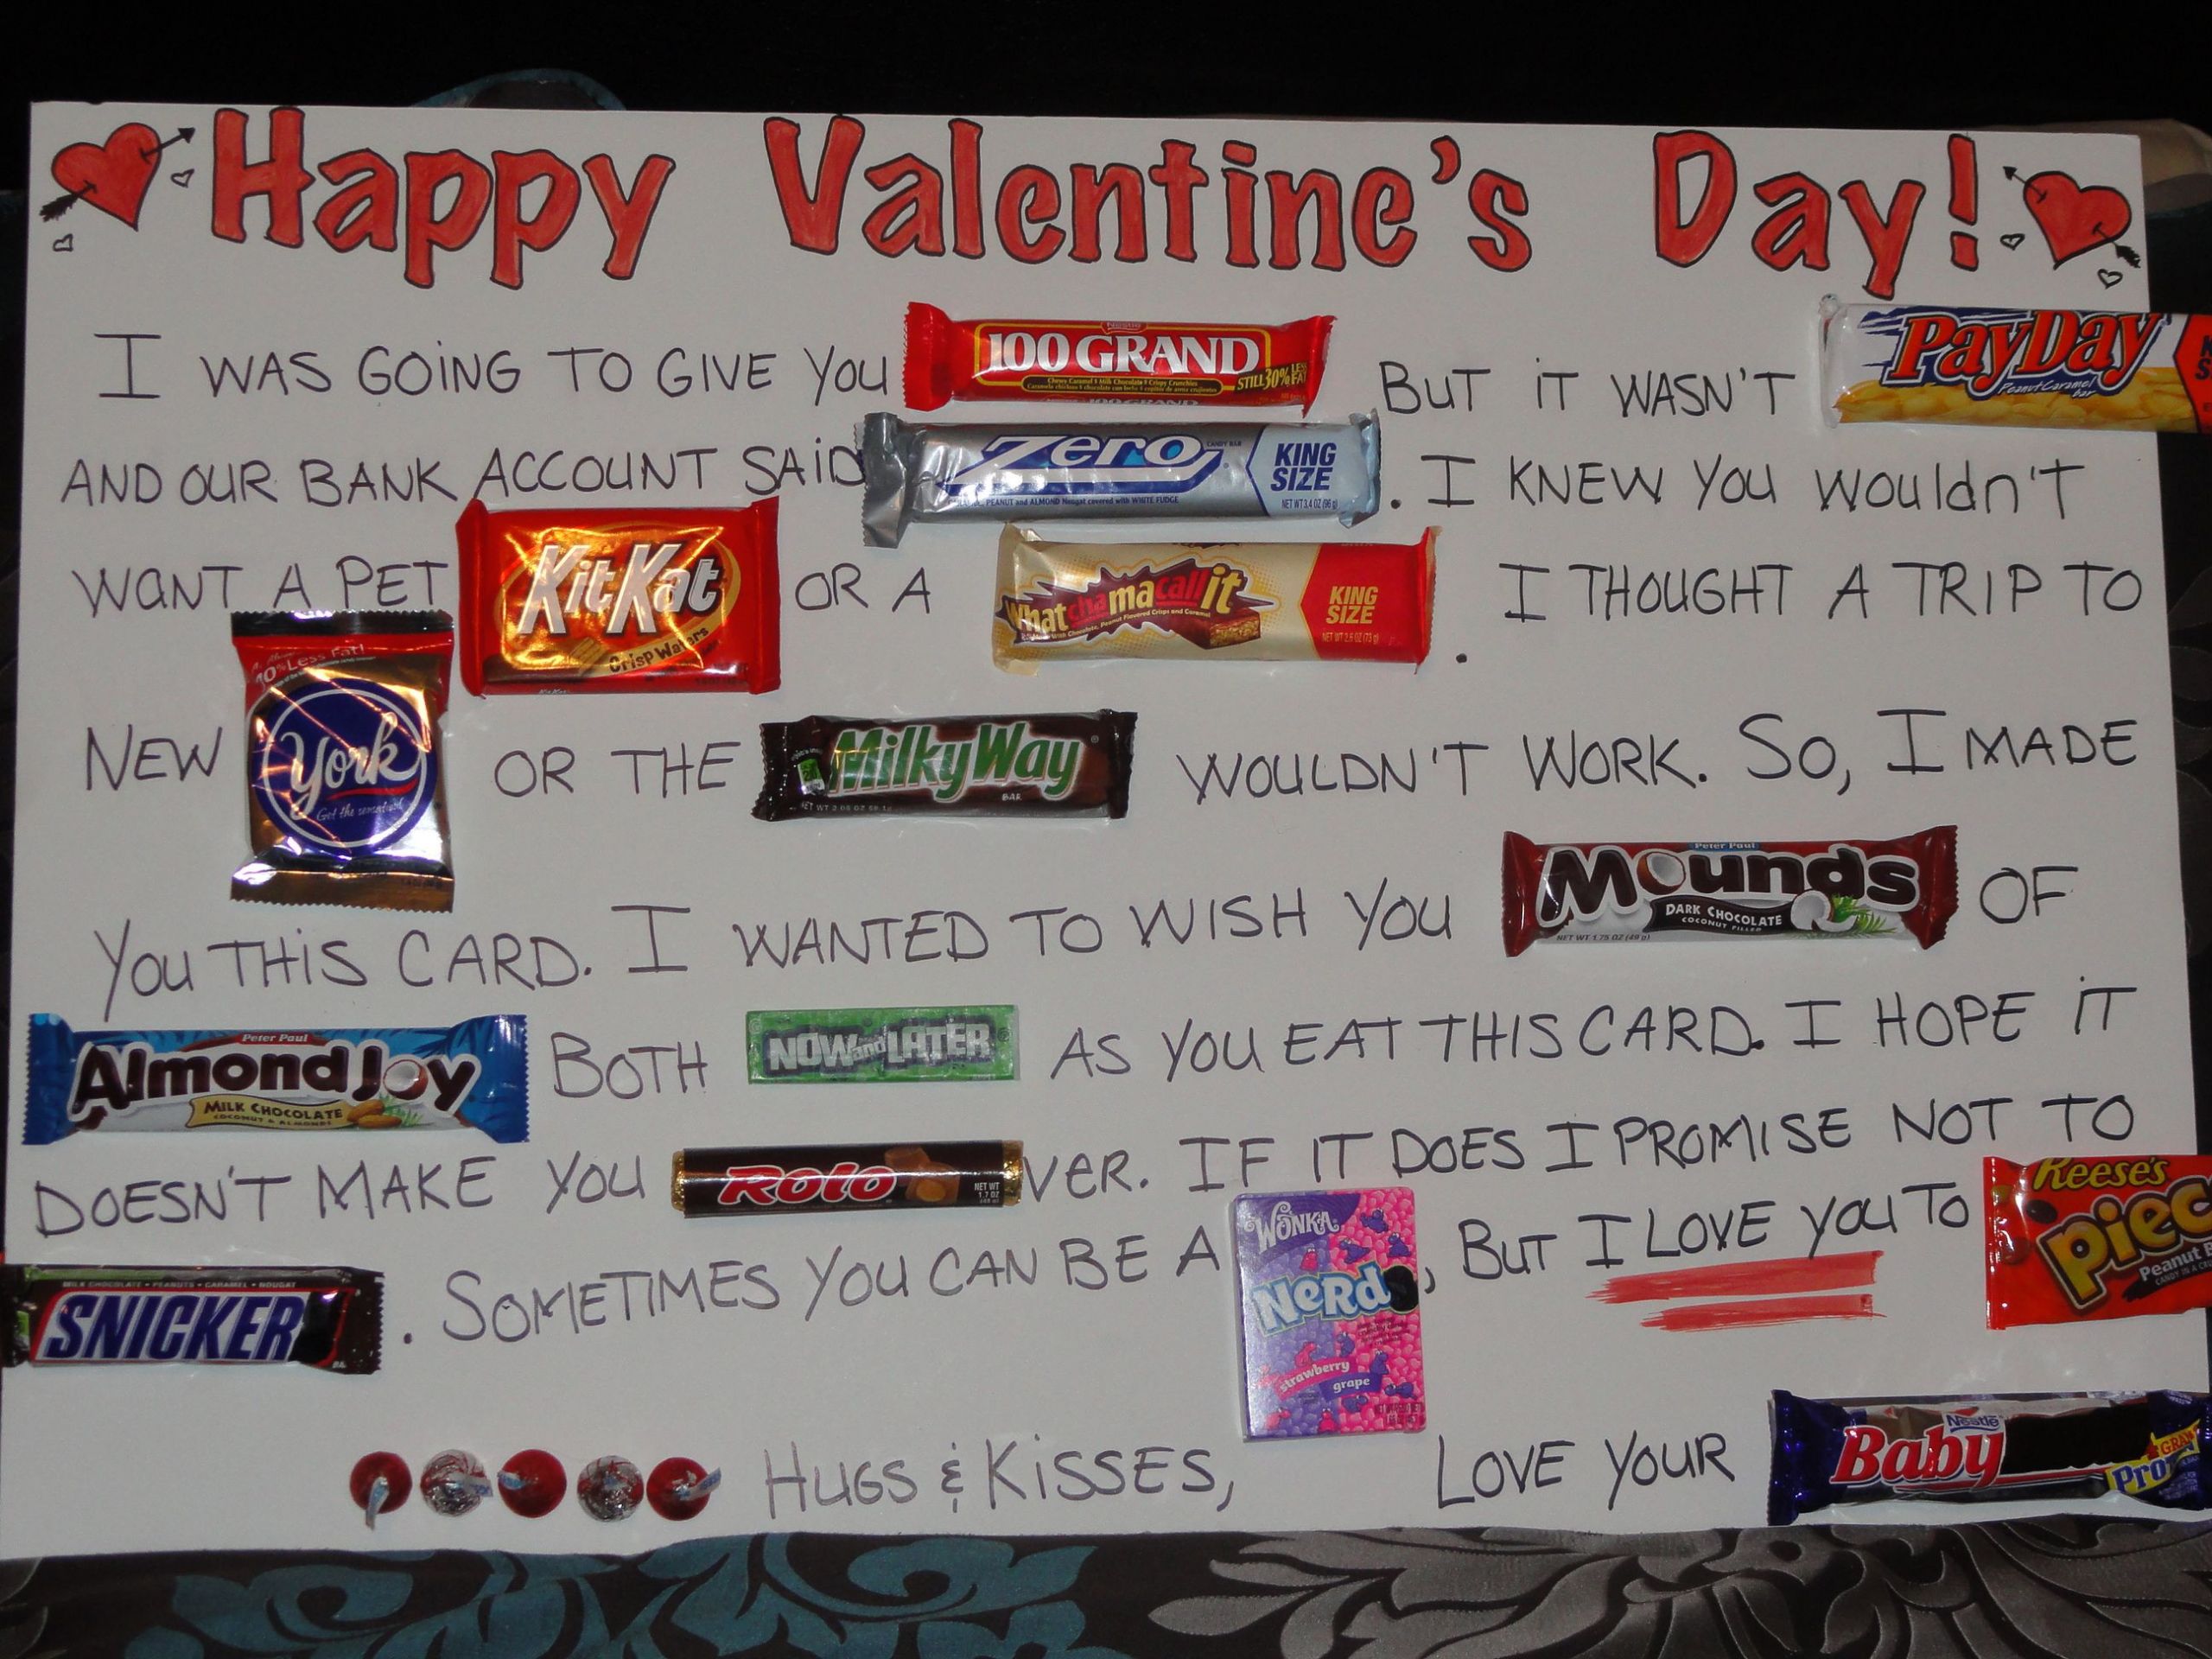 Valentines Day Candy Card
 What a great idea A candy bar card